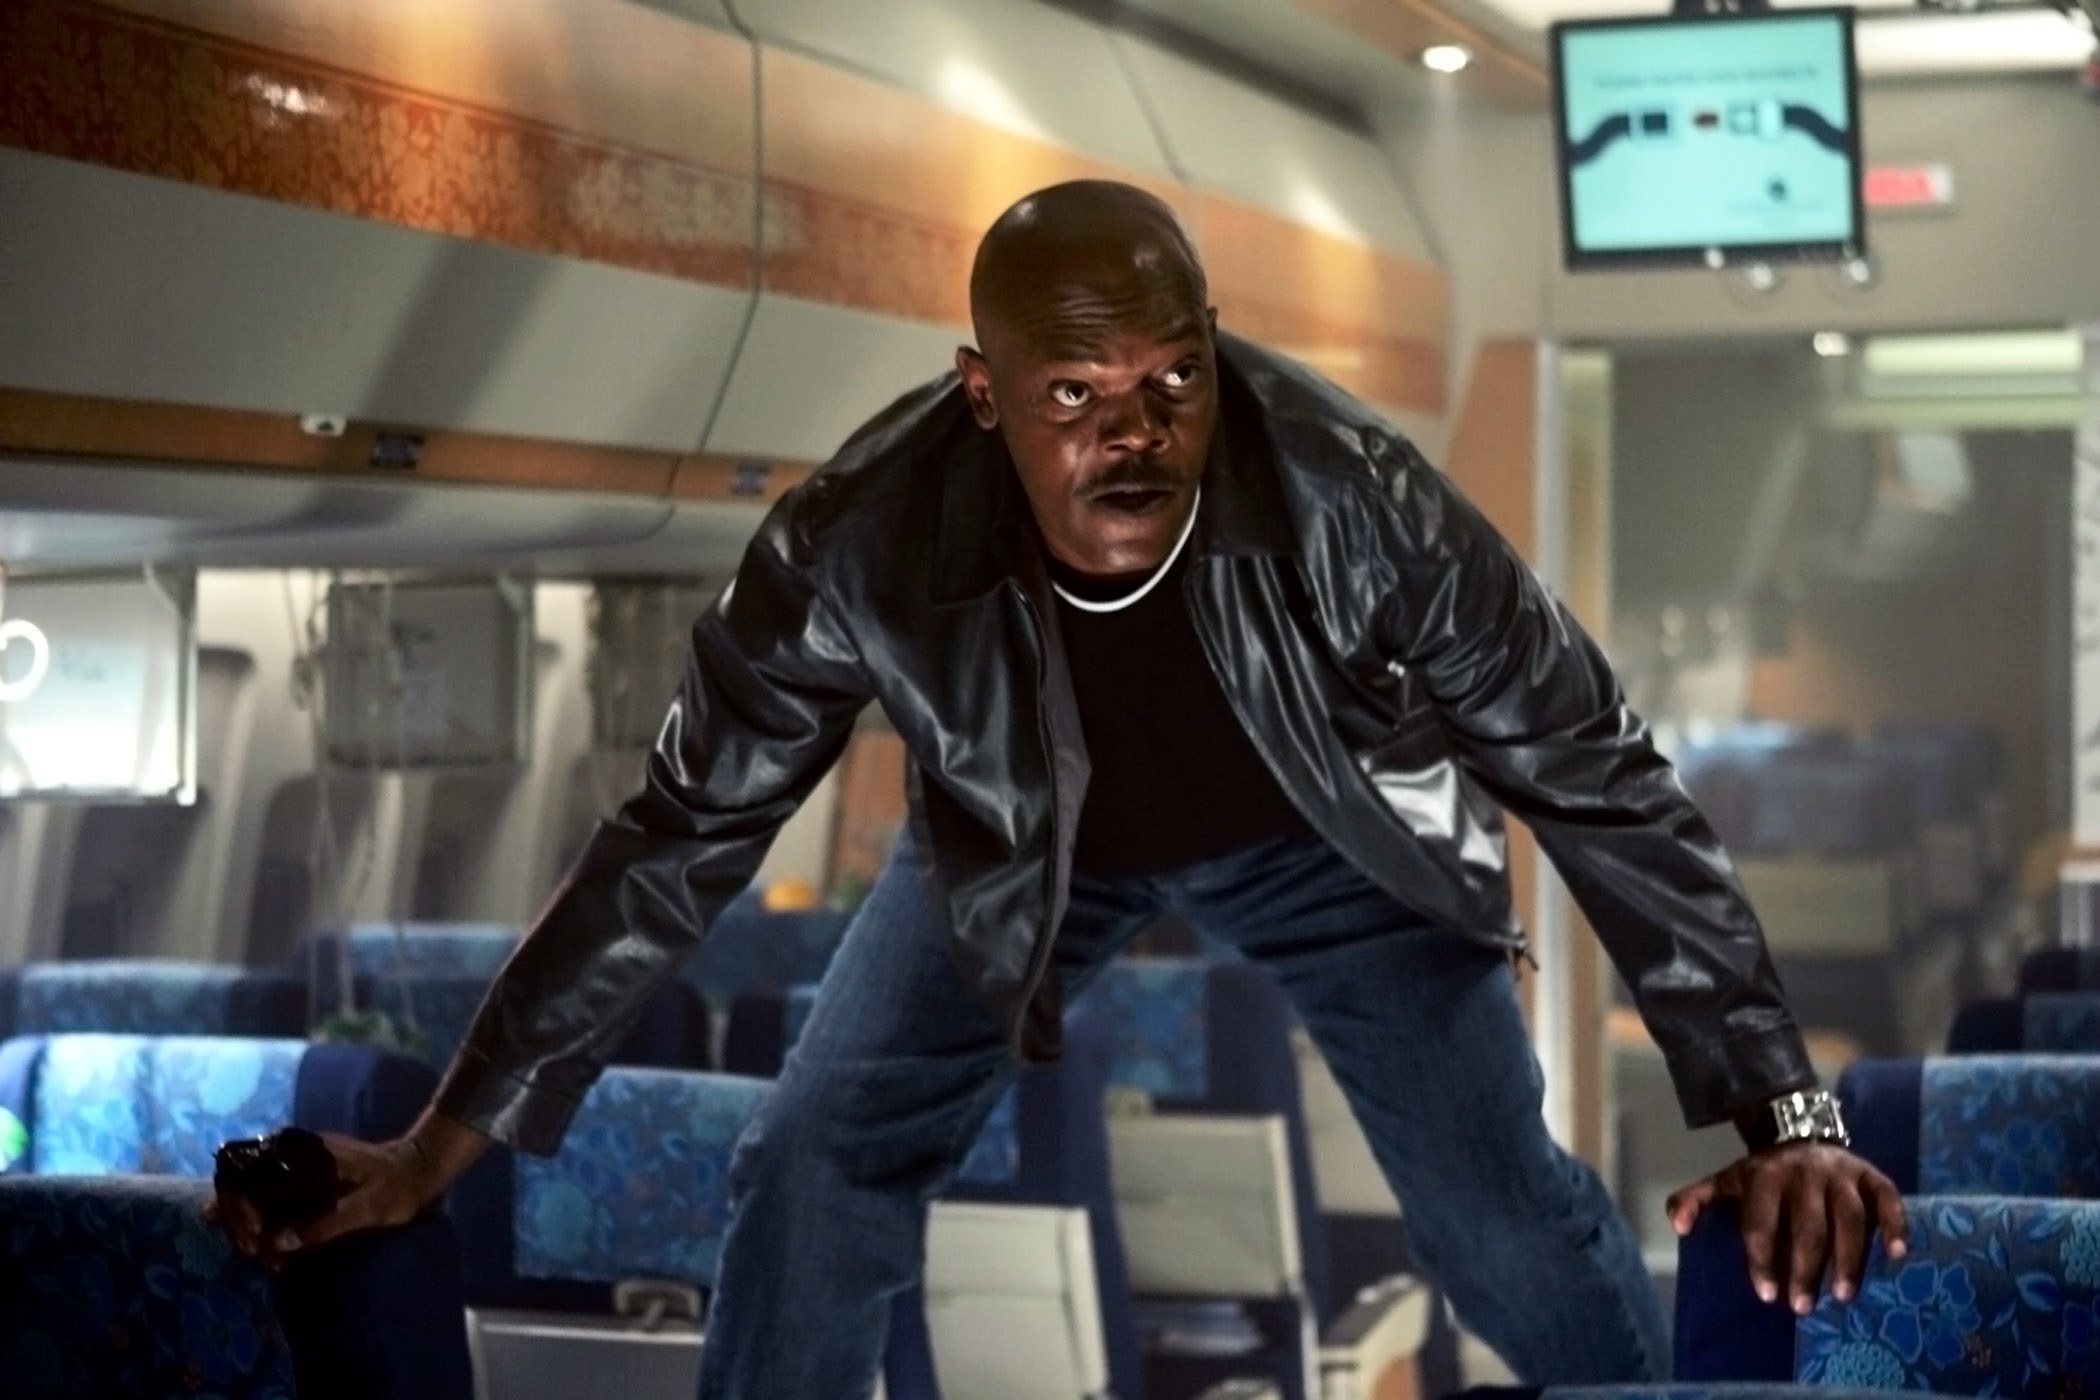 Jackson&#x27;s character standing on the plane&#x27;s seats